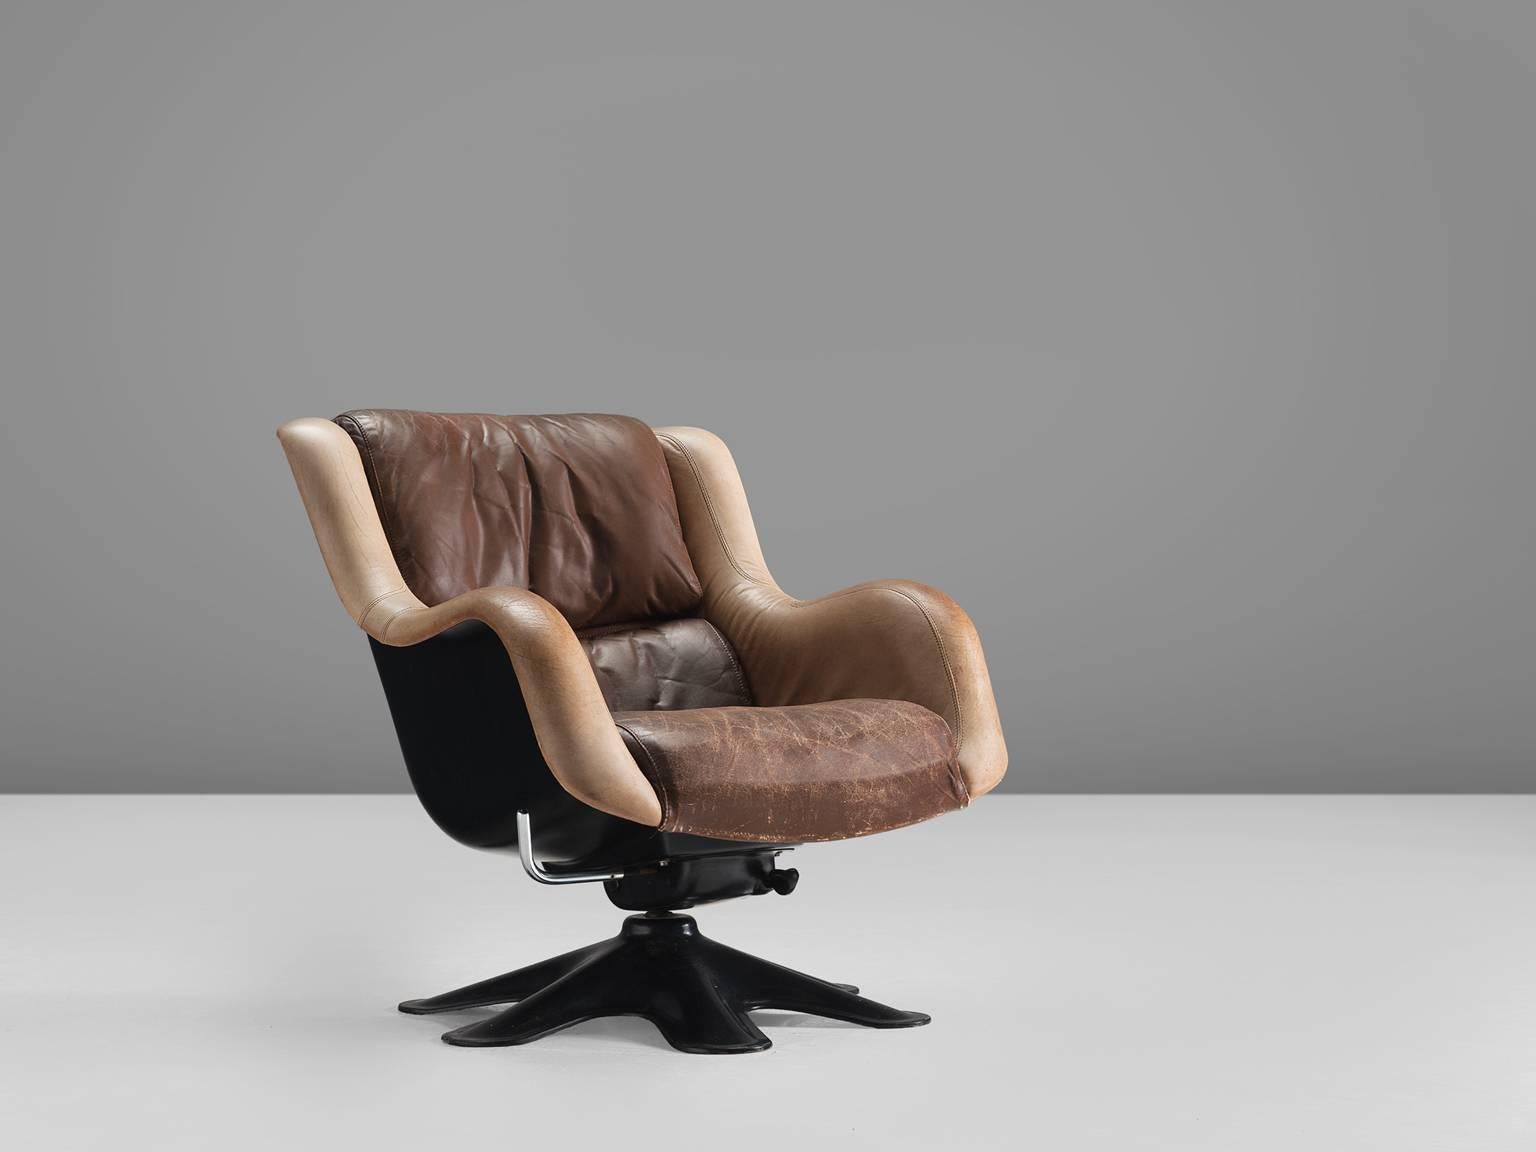 Yrjö Kukkapuro for Haimi, 'Karuselli' lounge chair, in leather, fiberglass, Finland, 1960s.

Organic shaped lounge chair by Finnish designer Yrjö Kukkapuro. This chair consist of a moulded plastic shell with thick leather cushions on the upholstery.